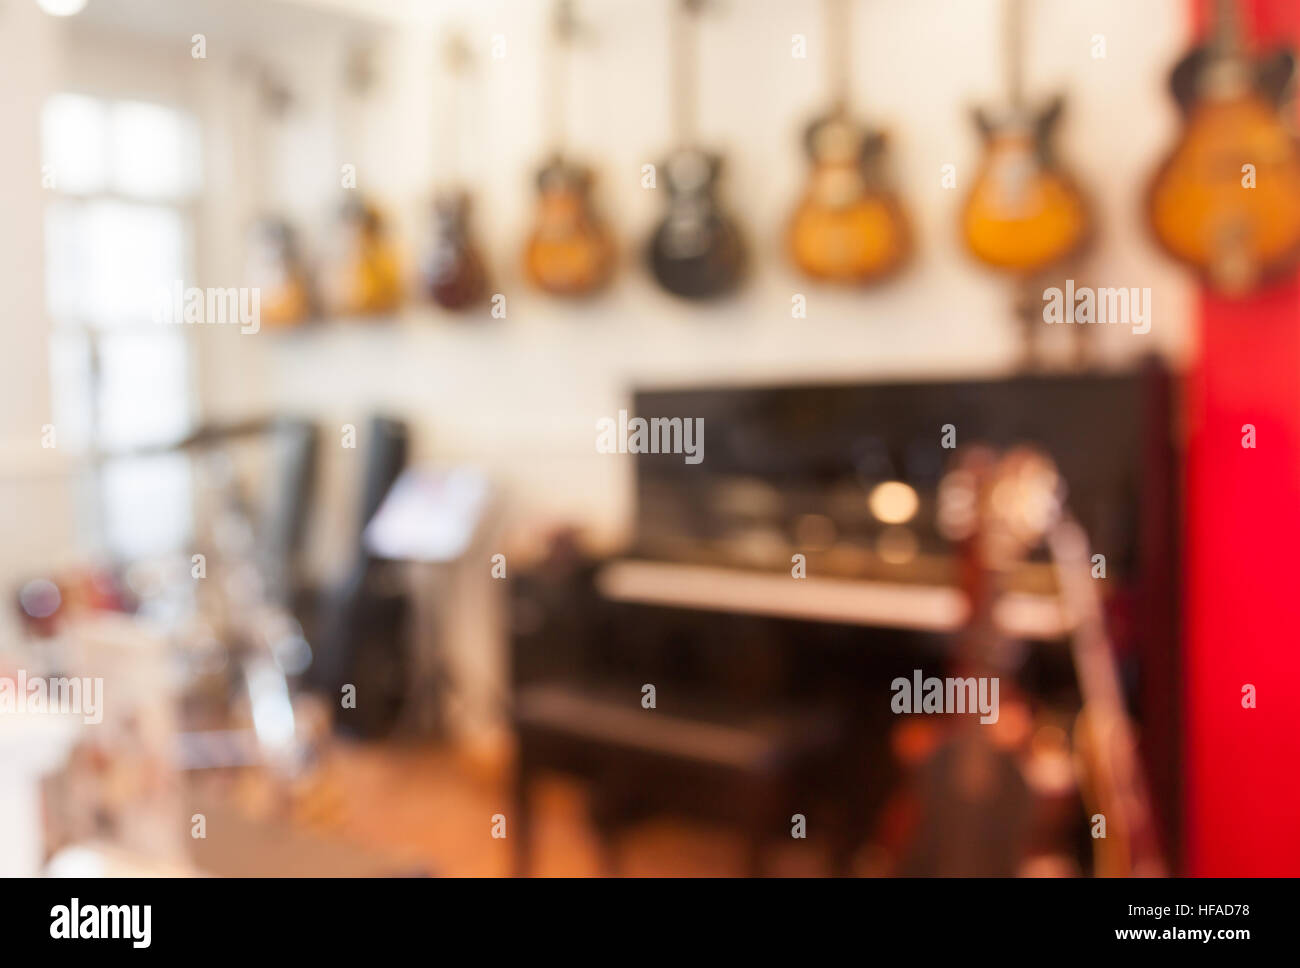 Blur abstract background with instruments in music store, stock photo Stock Photo